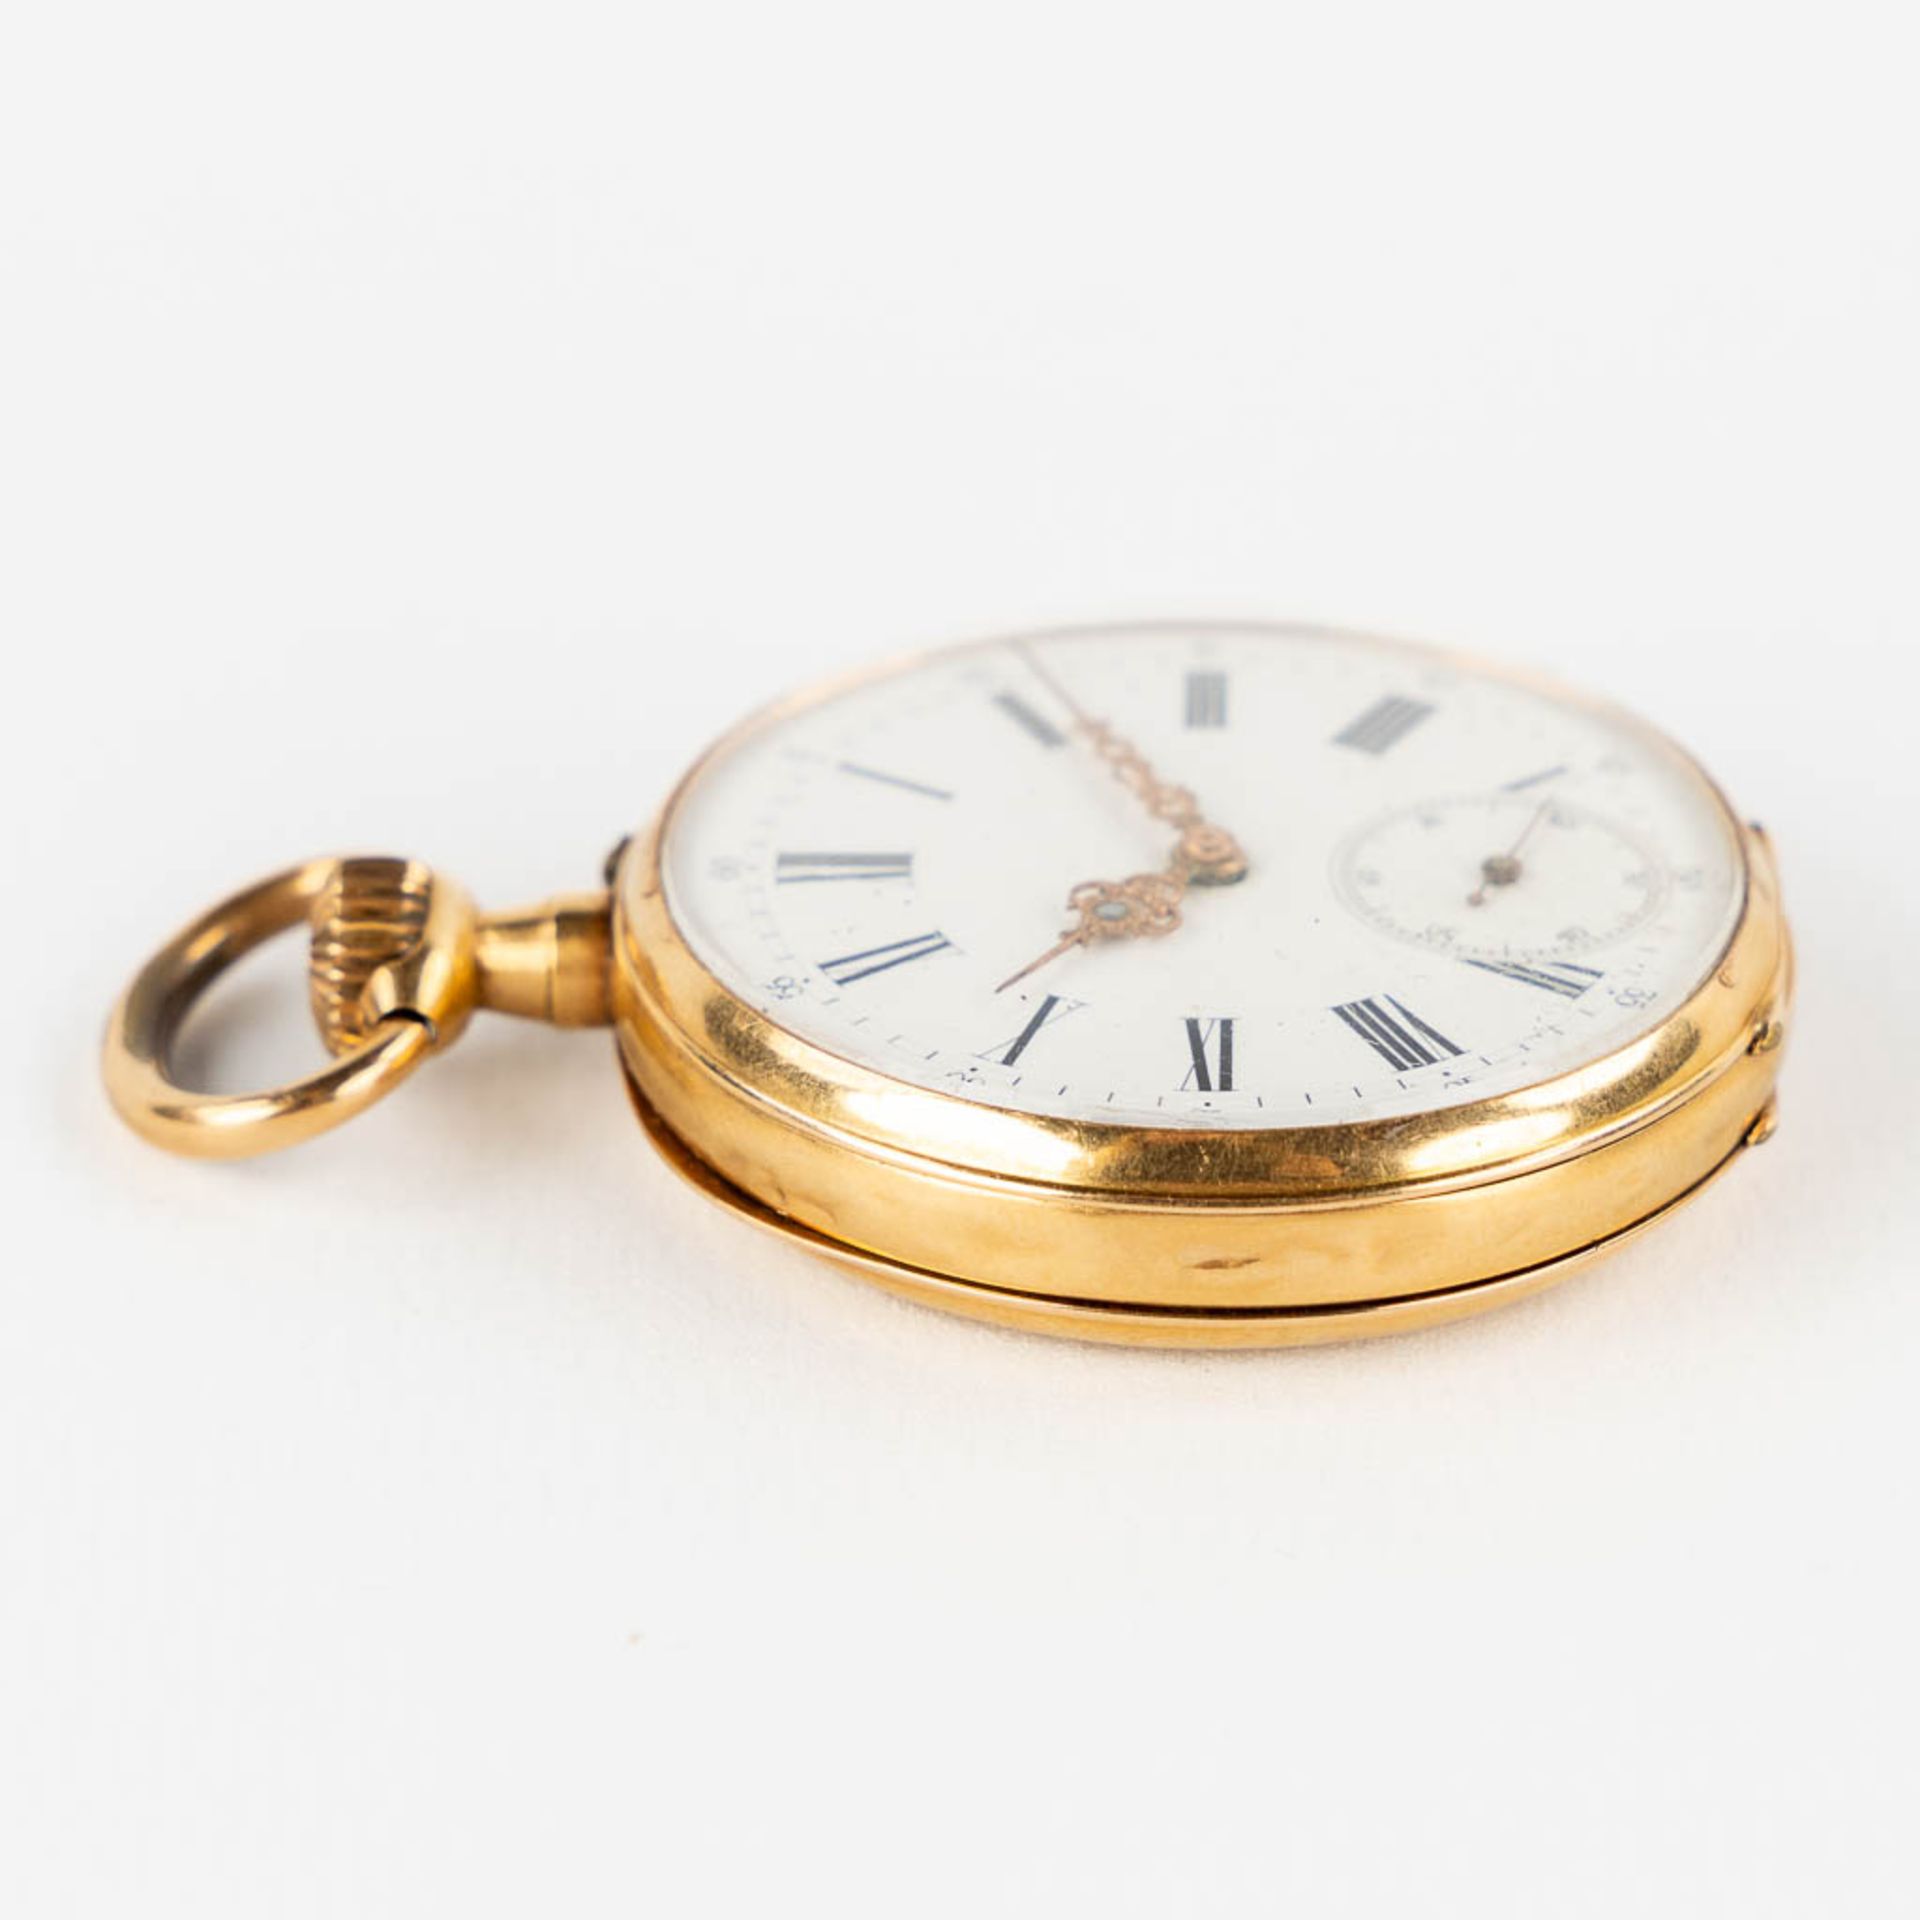 An antique pocket watch, 18kt yellow gold with a white enamel dial. (H:6,3 x D:4,3 cm) - Image 4 of 10